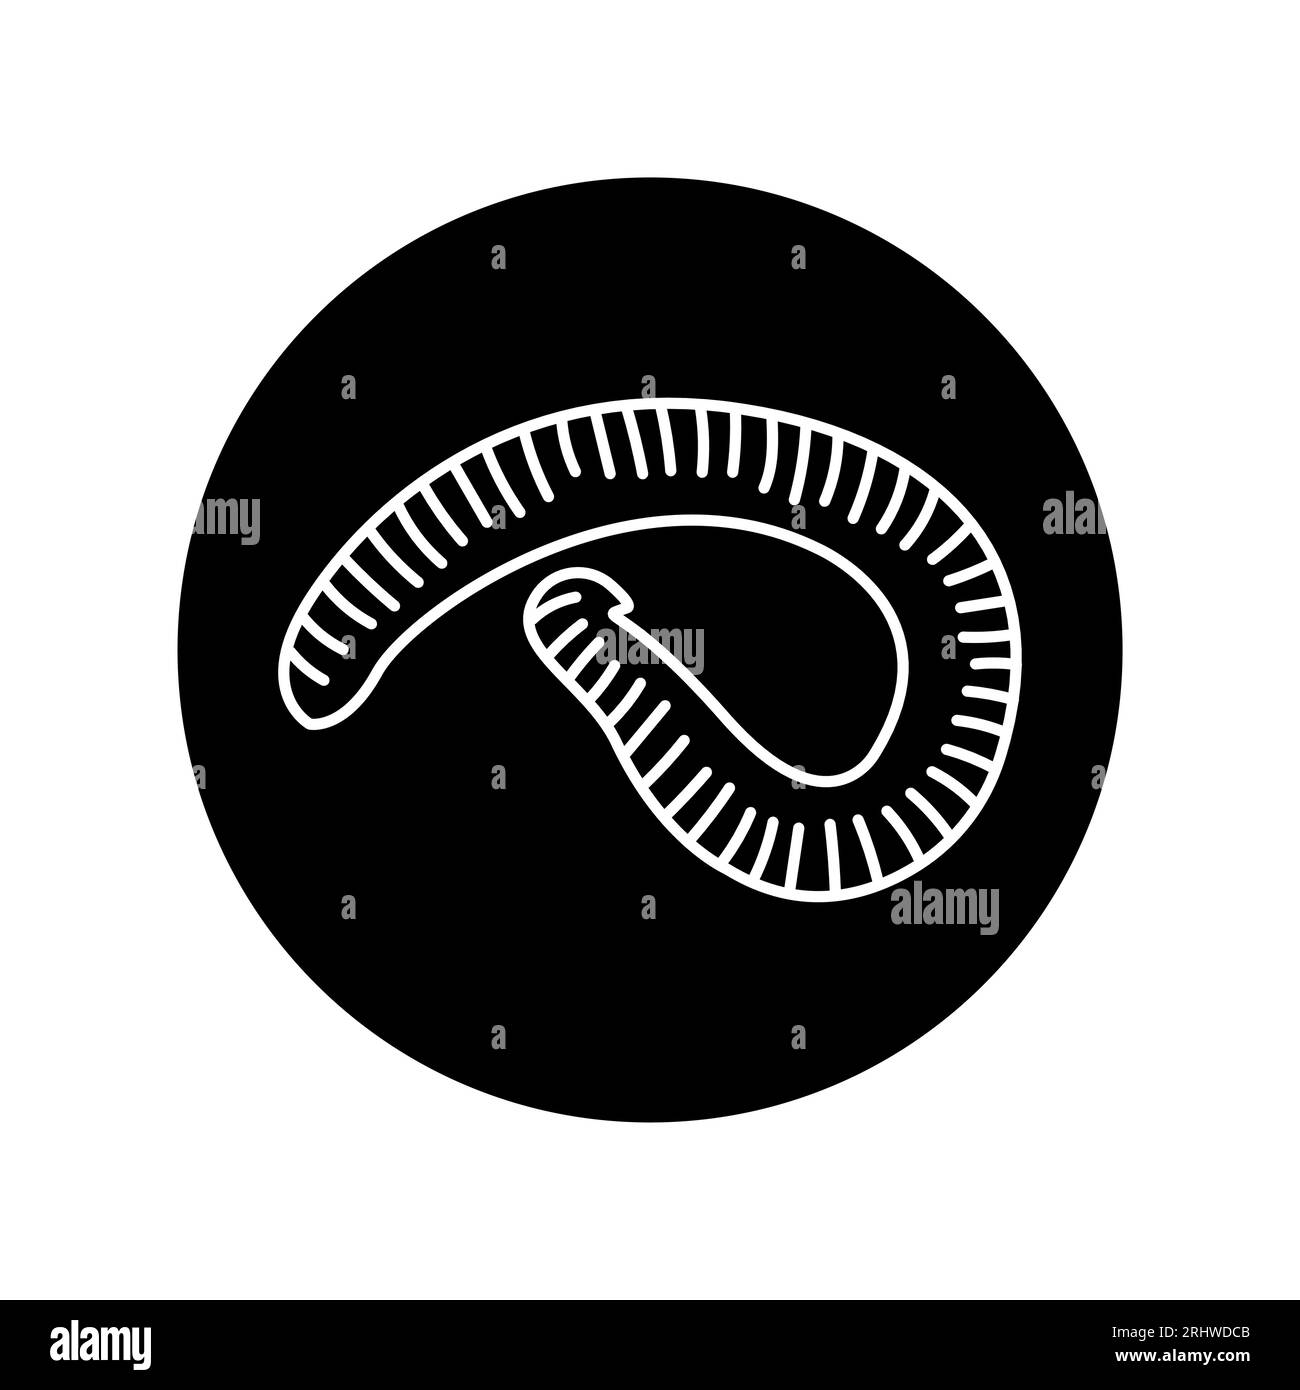 African centipede black line icon. Pictogram for web page, mobile app, promo. Stock Vector